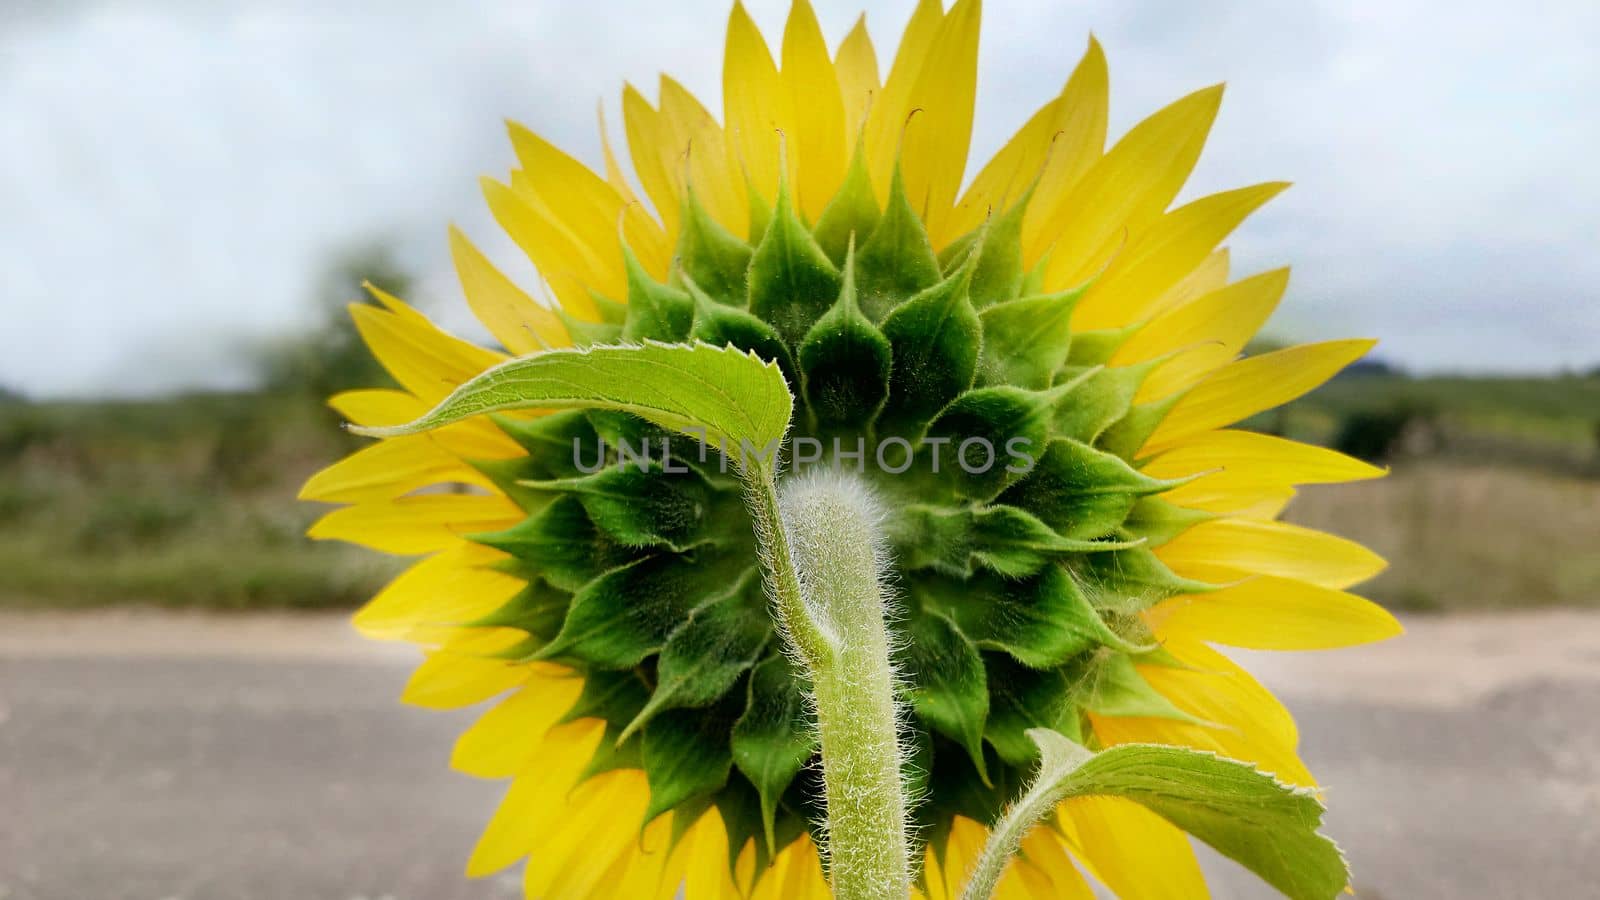 View of a yellow sunflower from the back on a cloudy day.Texture or background